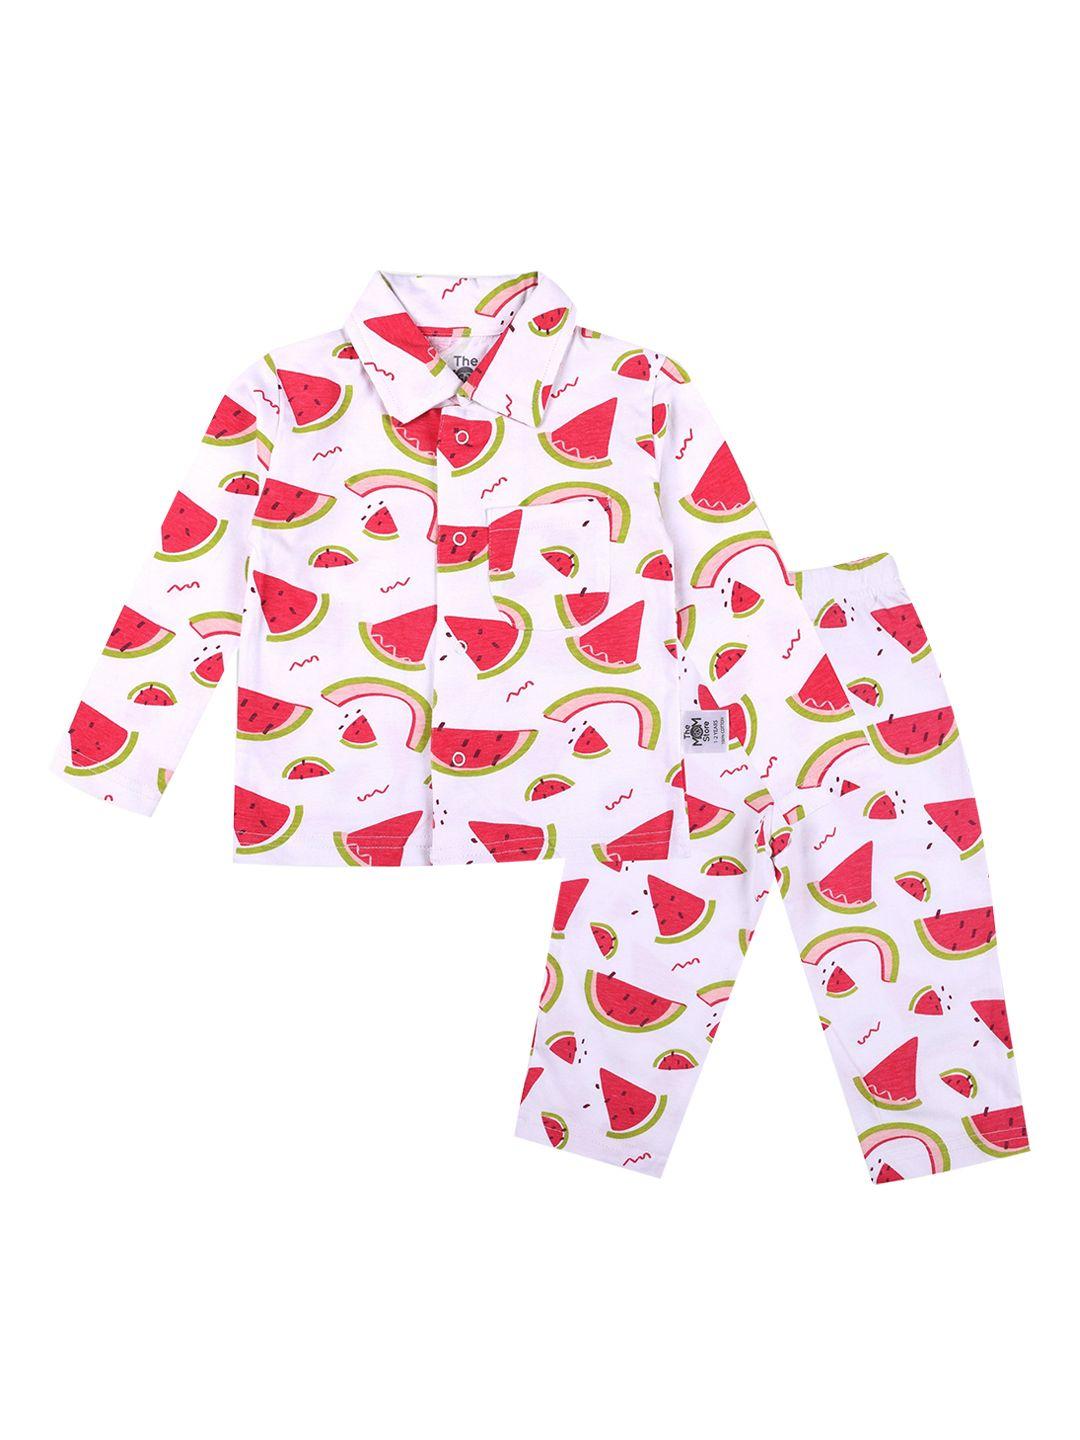 the mom store unisex kids red & white printed night suit